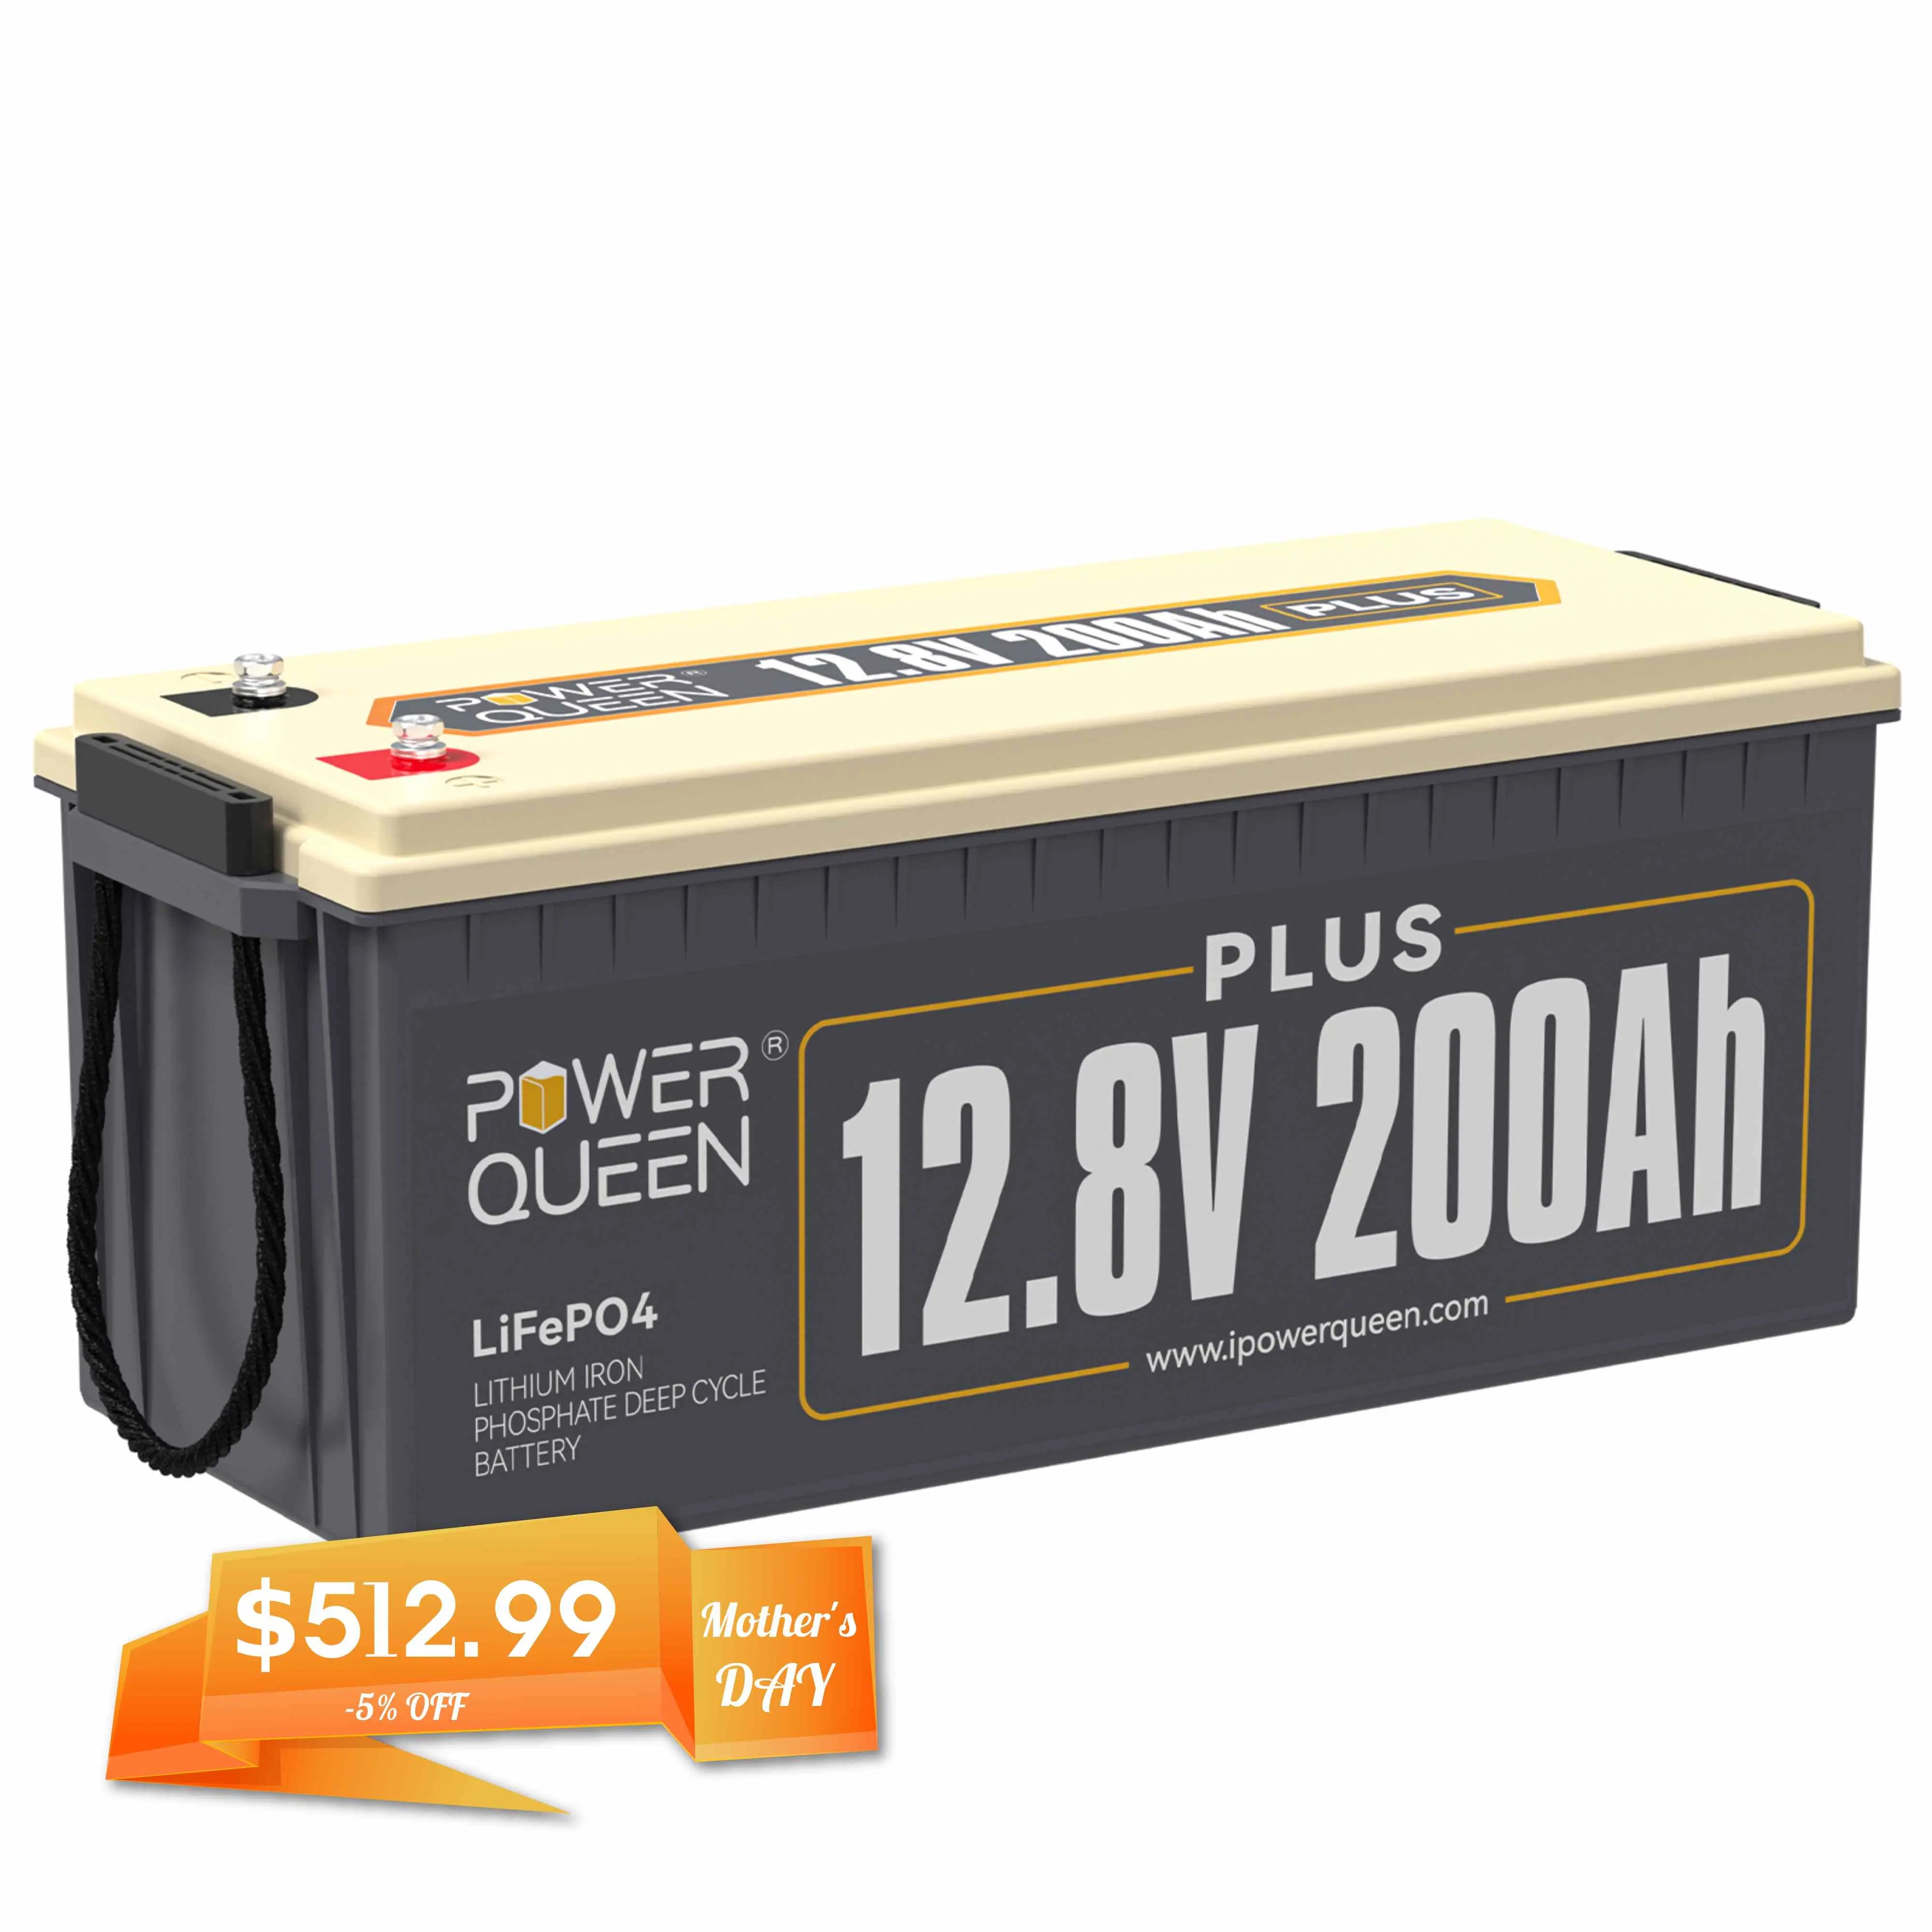 [Only $512] Power Queen 12V 200Ah PLUS Deep Cycle Lithium Battery Power Queen